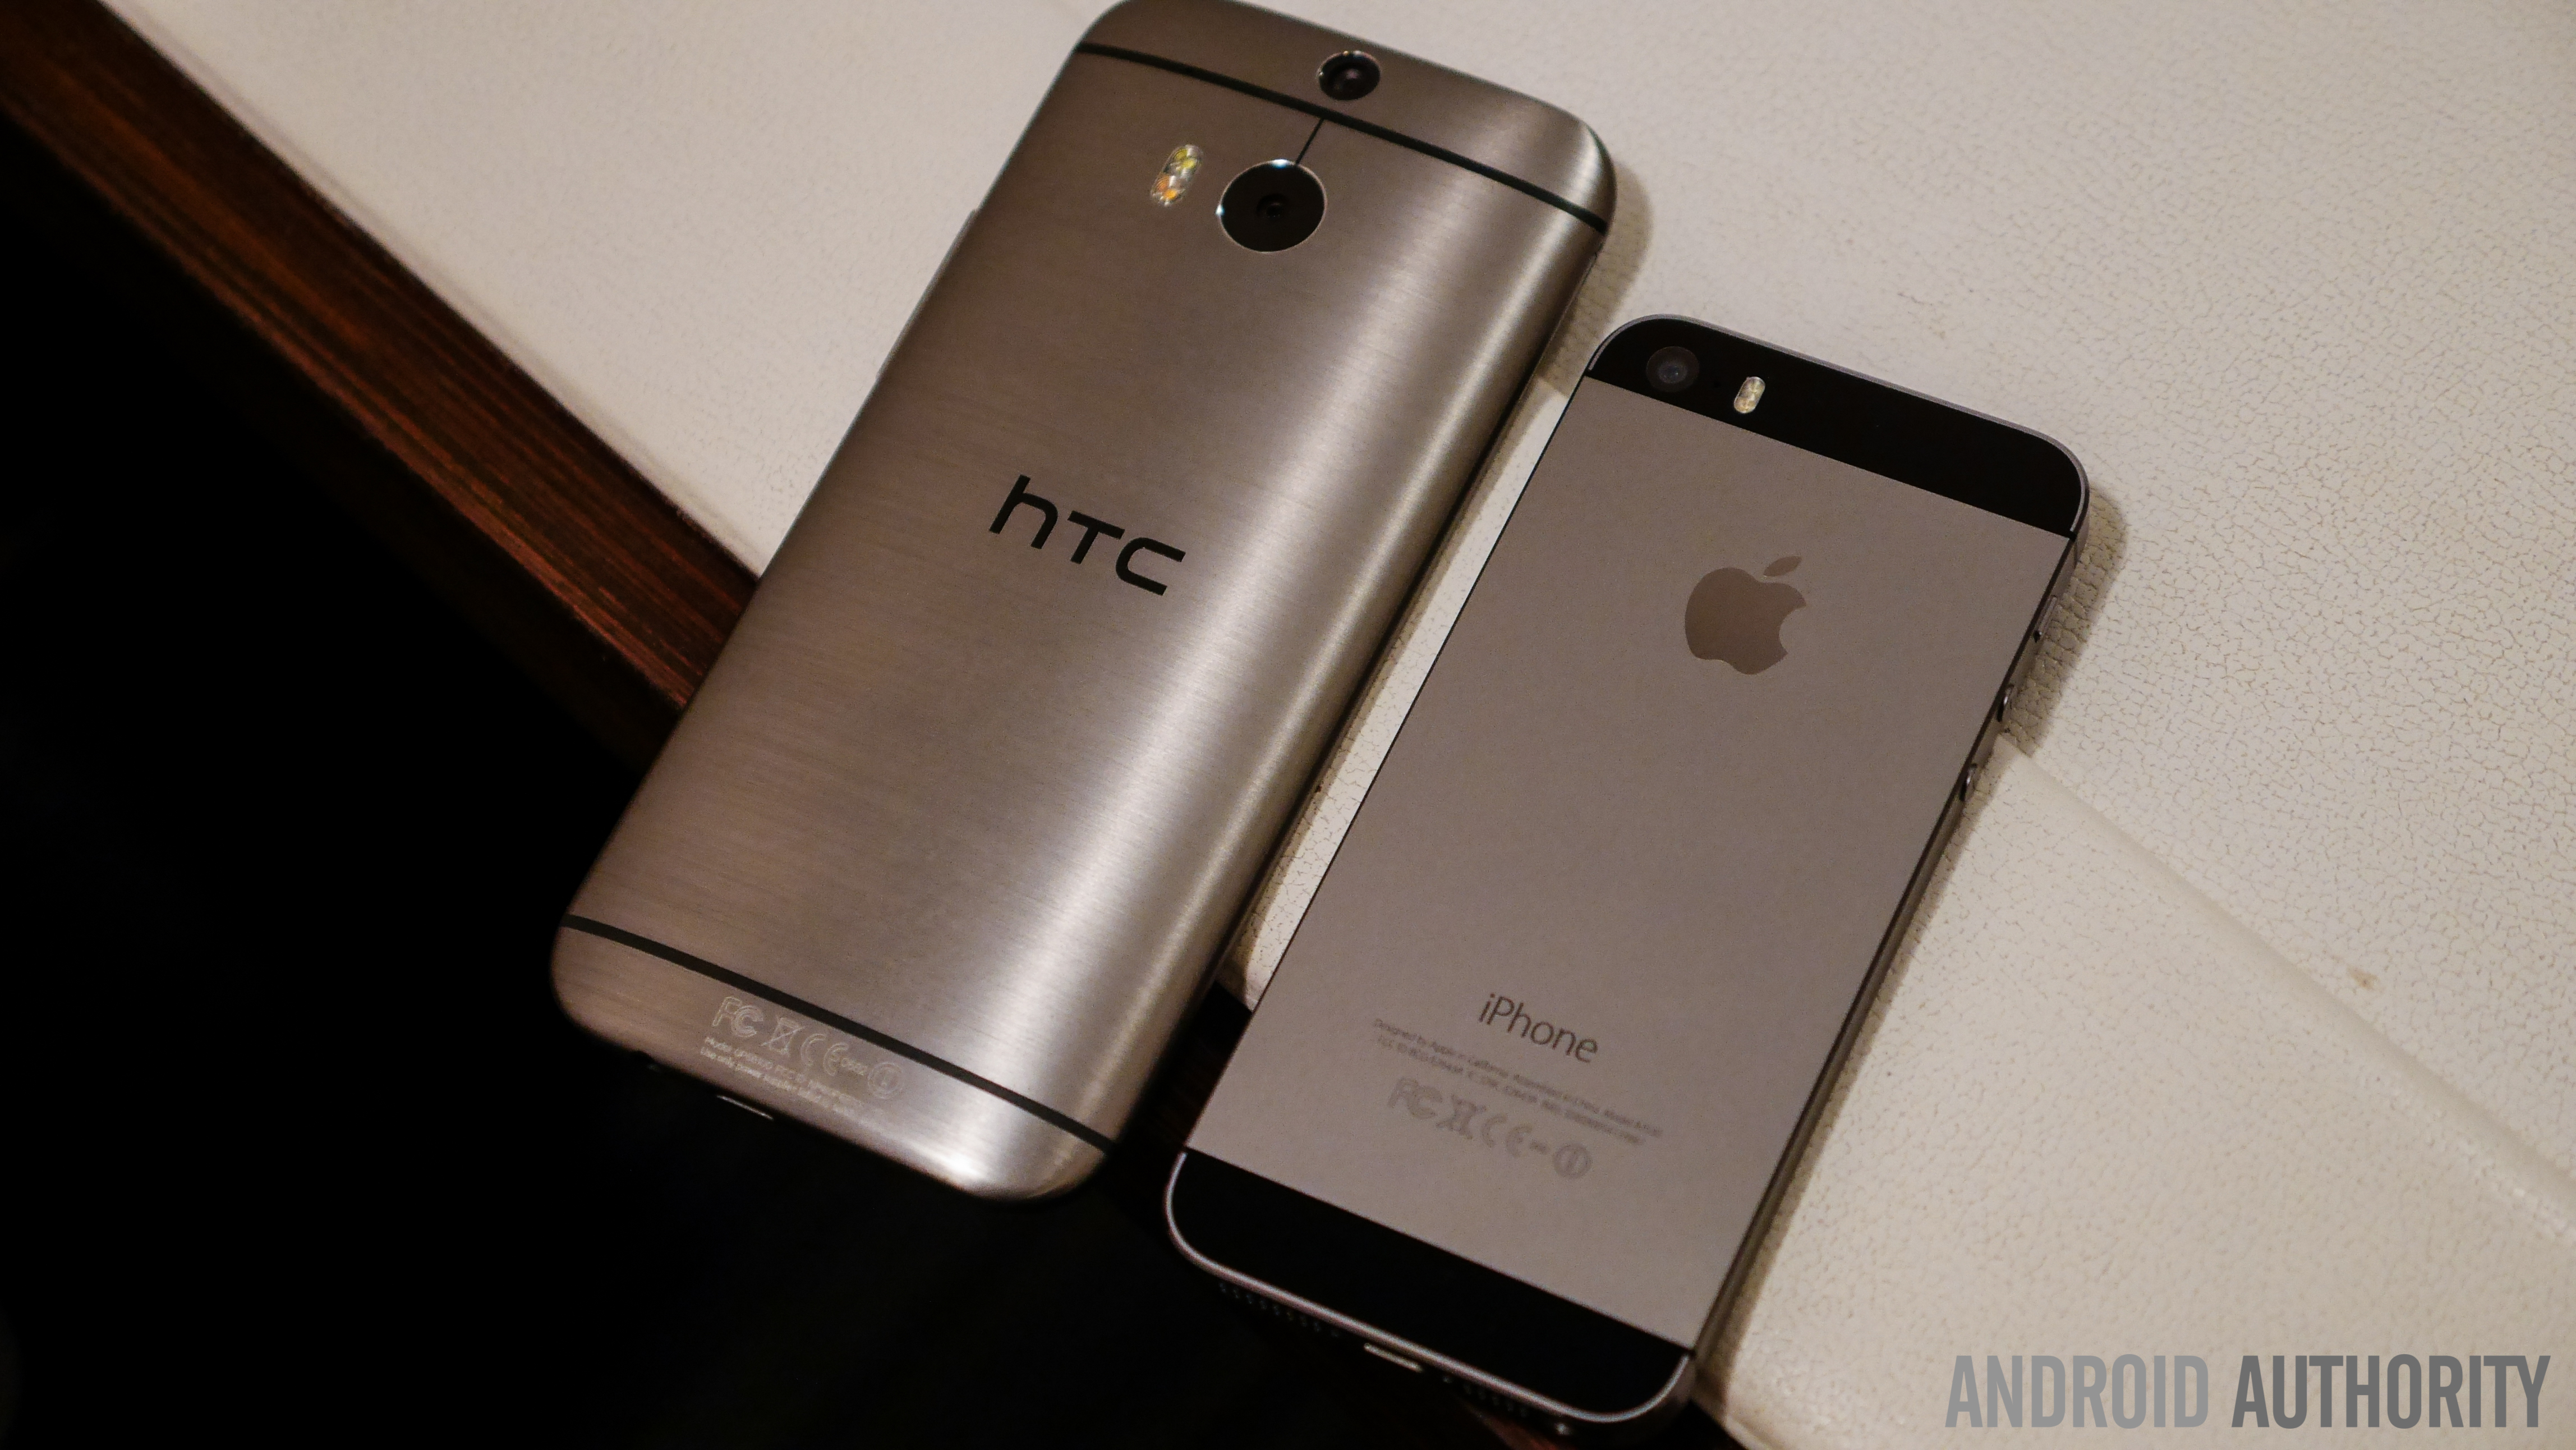 htc one m8 vs iphone 5s quick look aa (5 of 15)